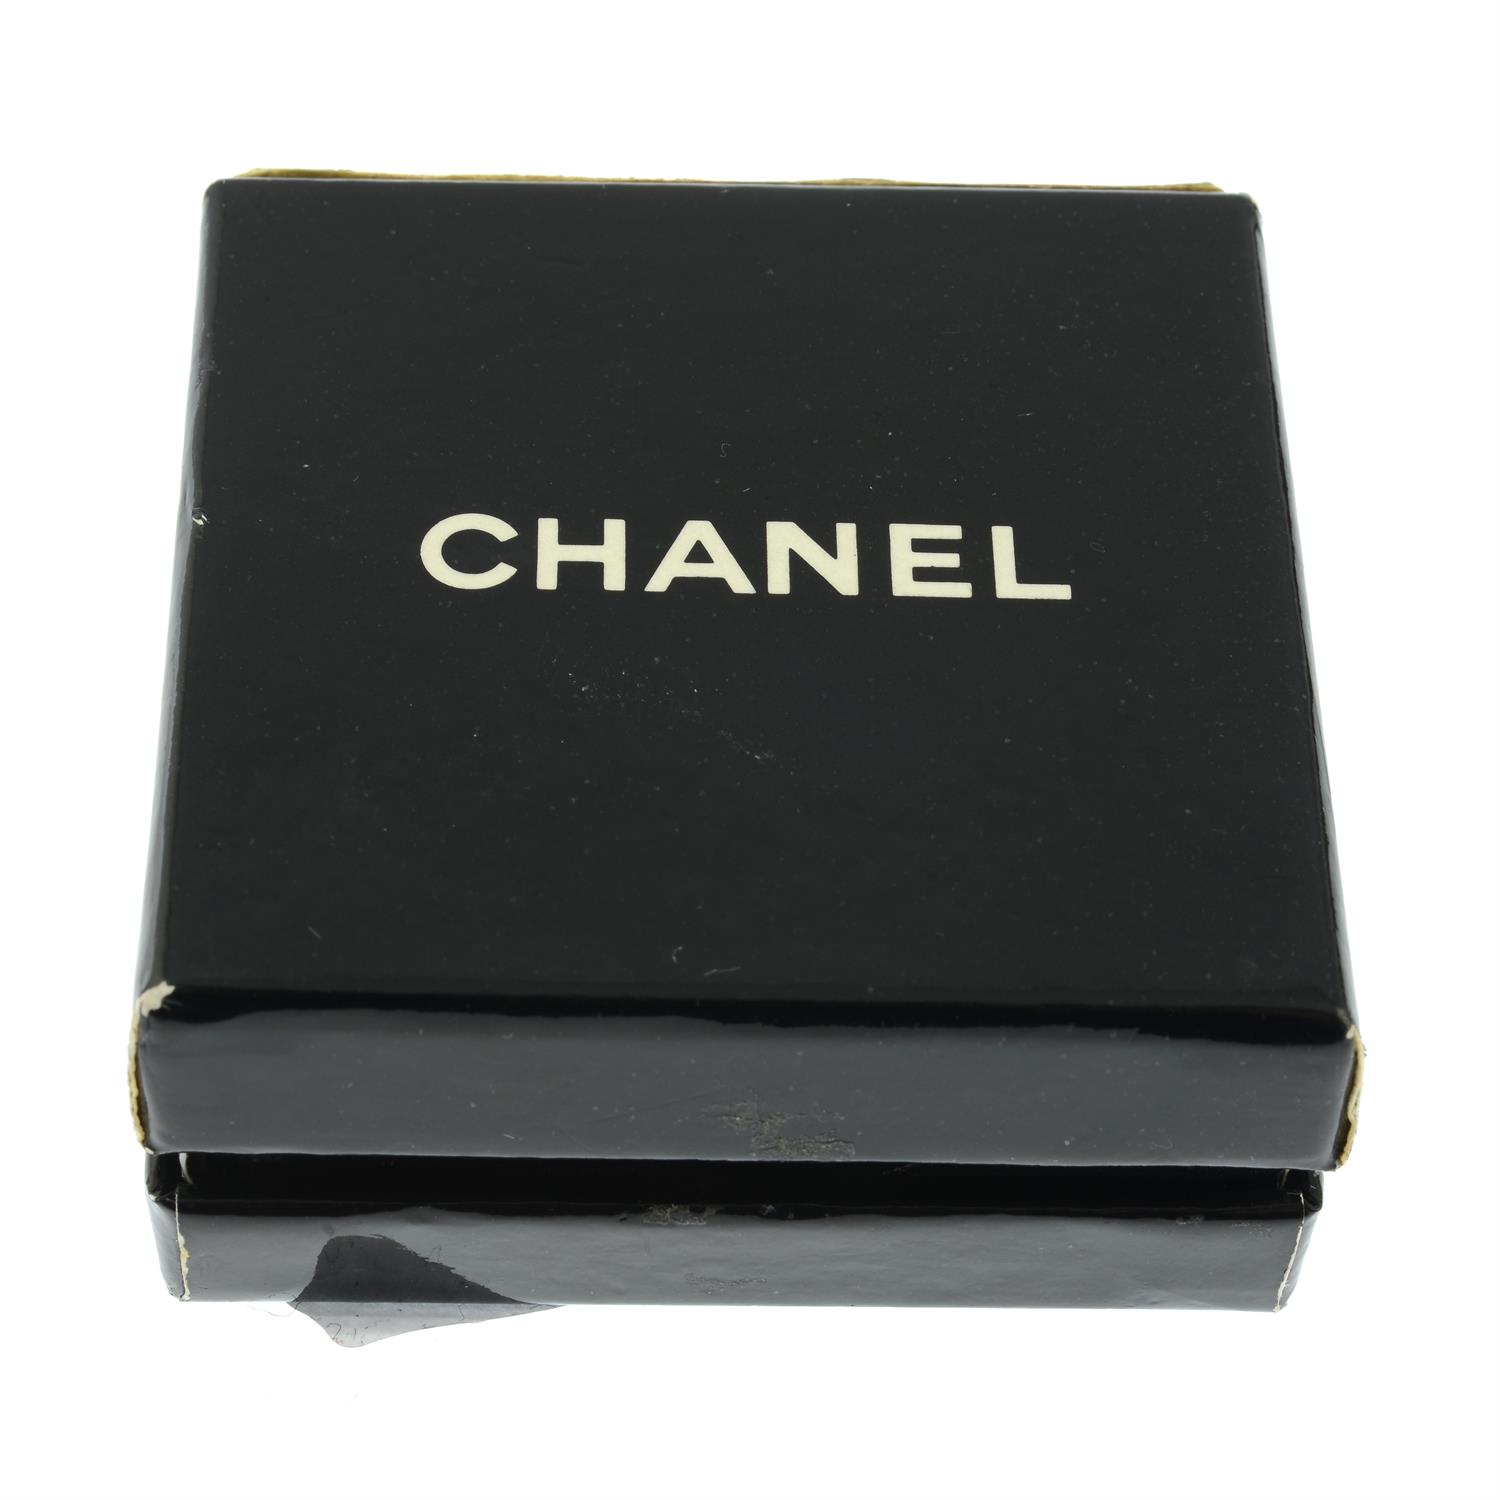 CHANEL - a pair of imitation pearl earrings. - Image 3 of 3